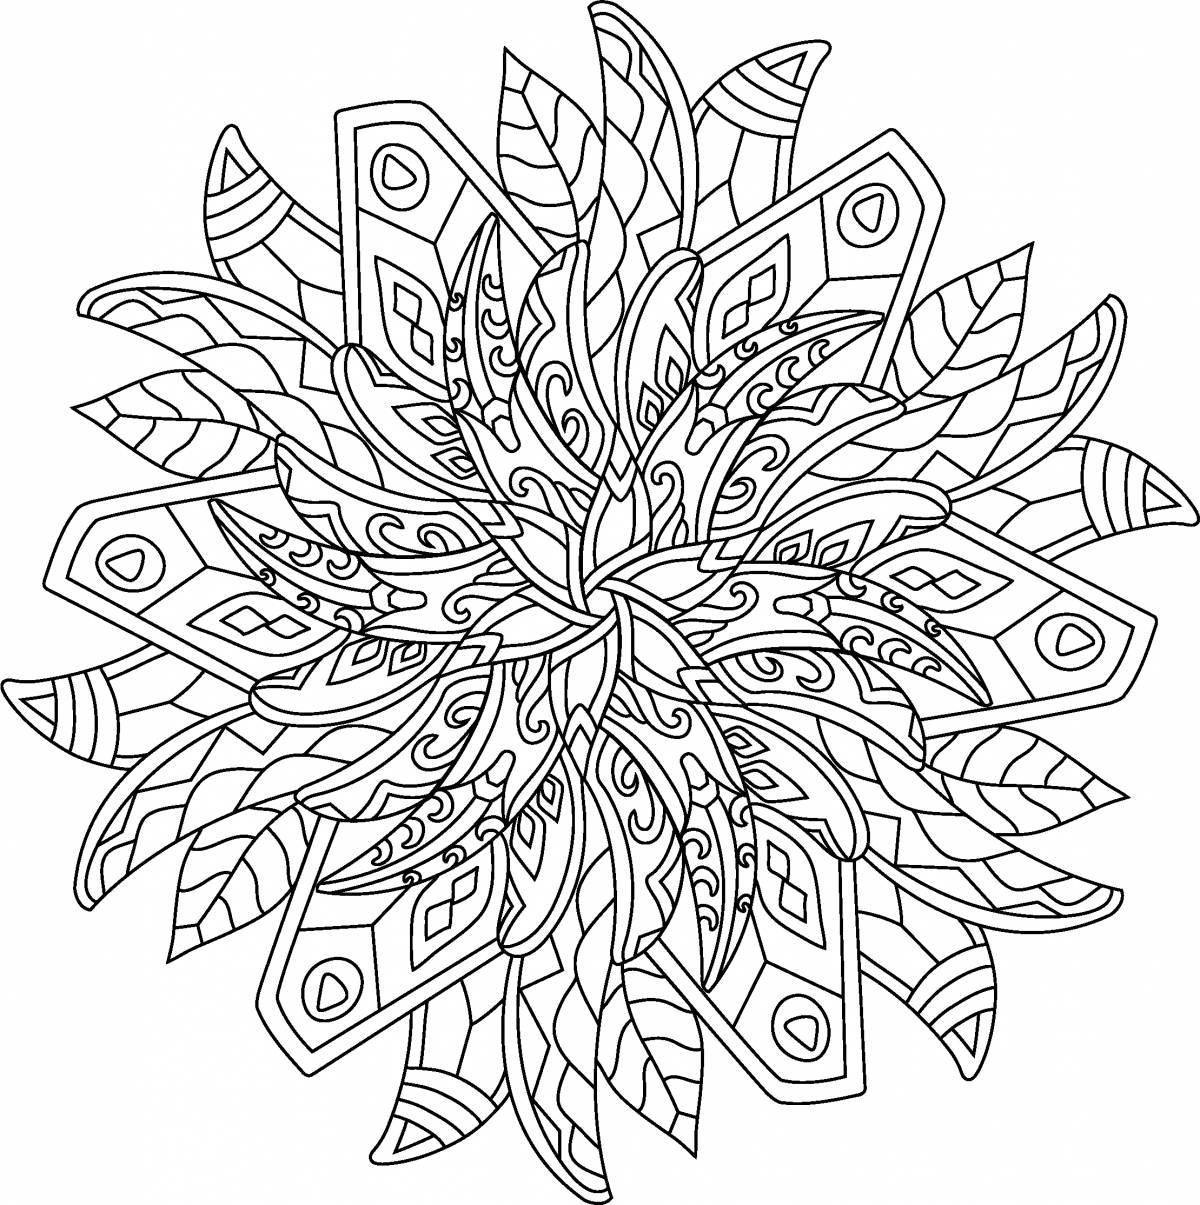 Great mandala coloring book for 10 year olds